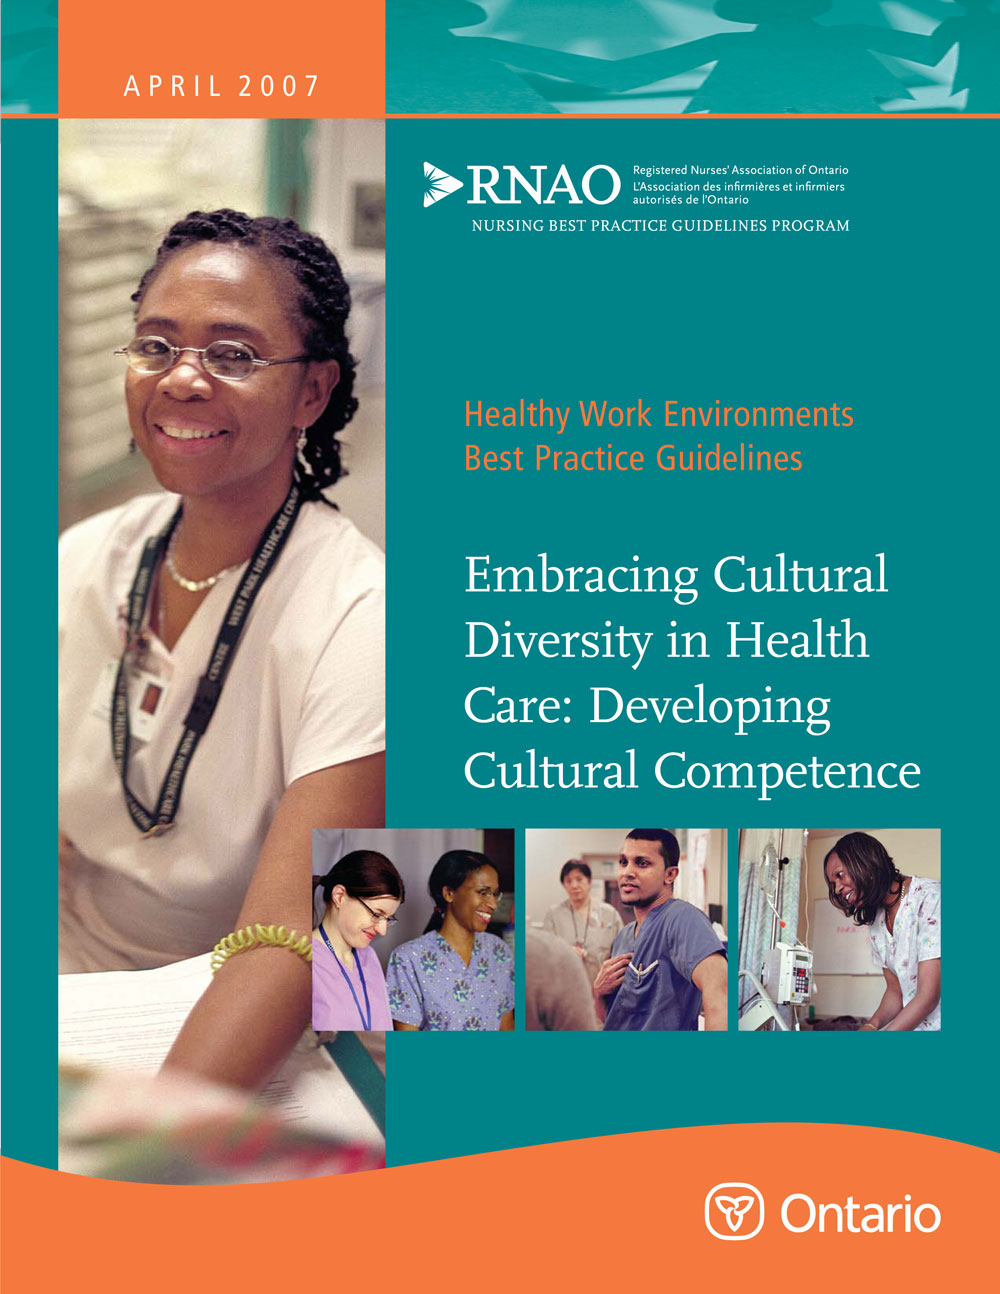 why is cultural diversity important in nursing